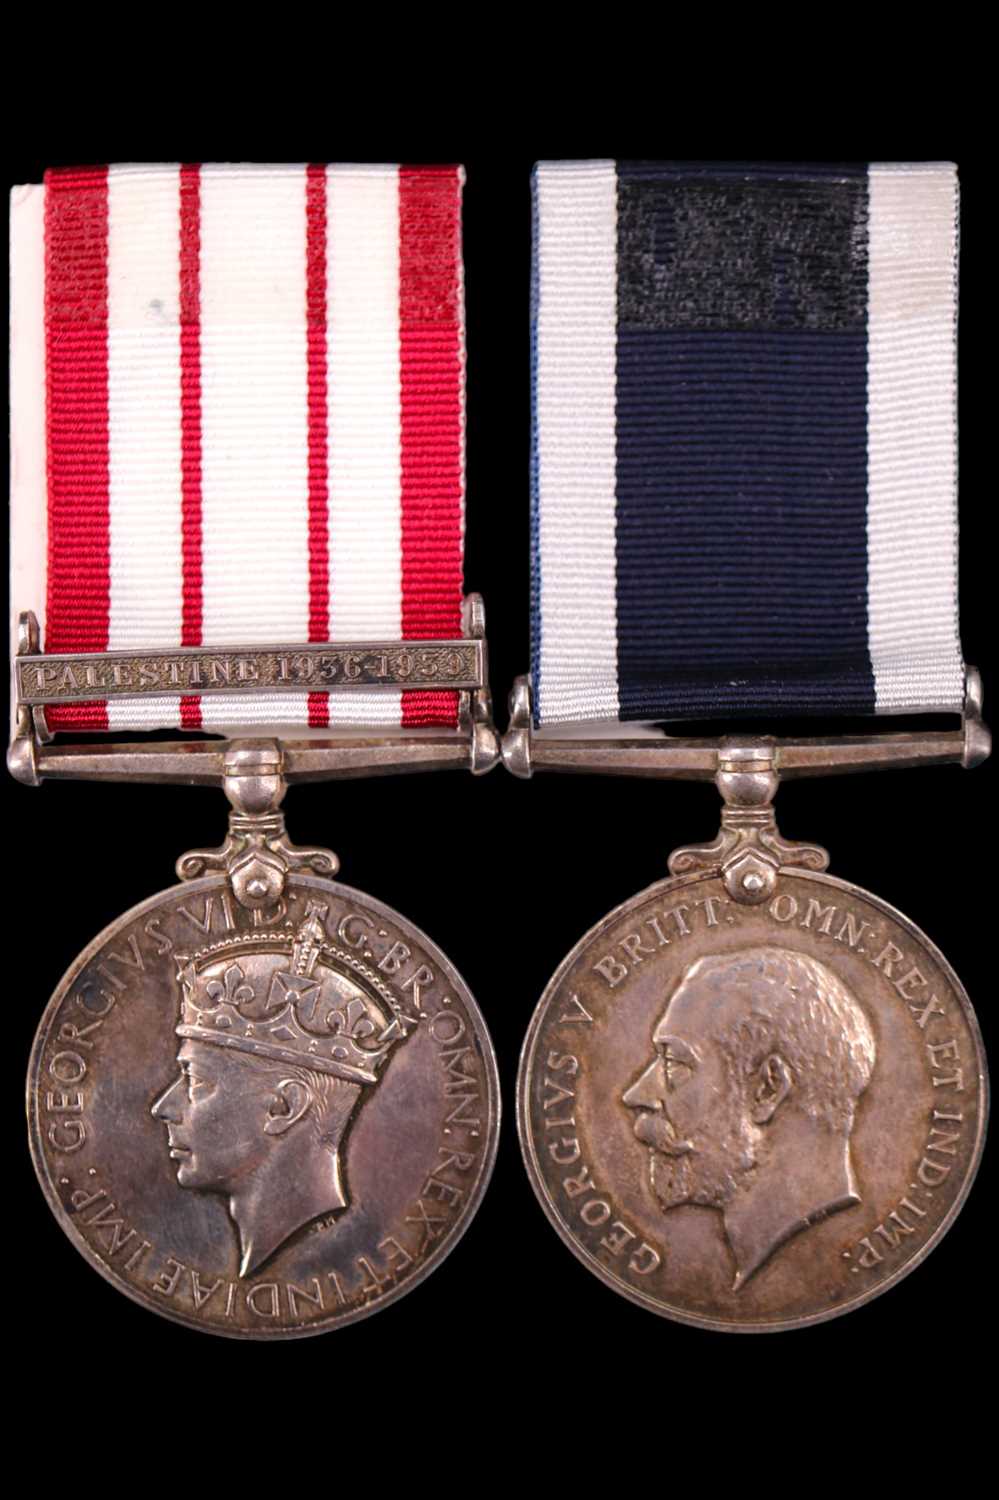 A George VI Naval General Service Medal with Palestine 1936-1939 clasp and George V Royal Navy